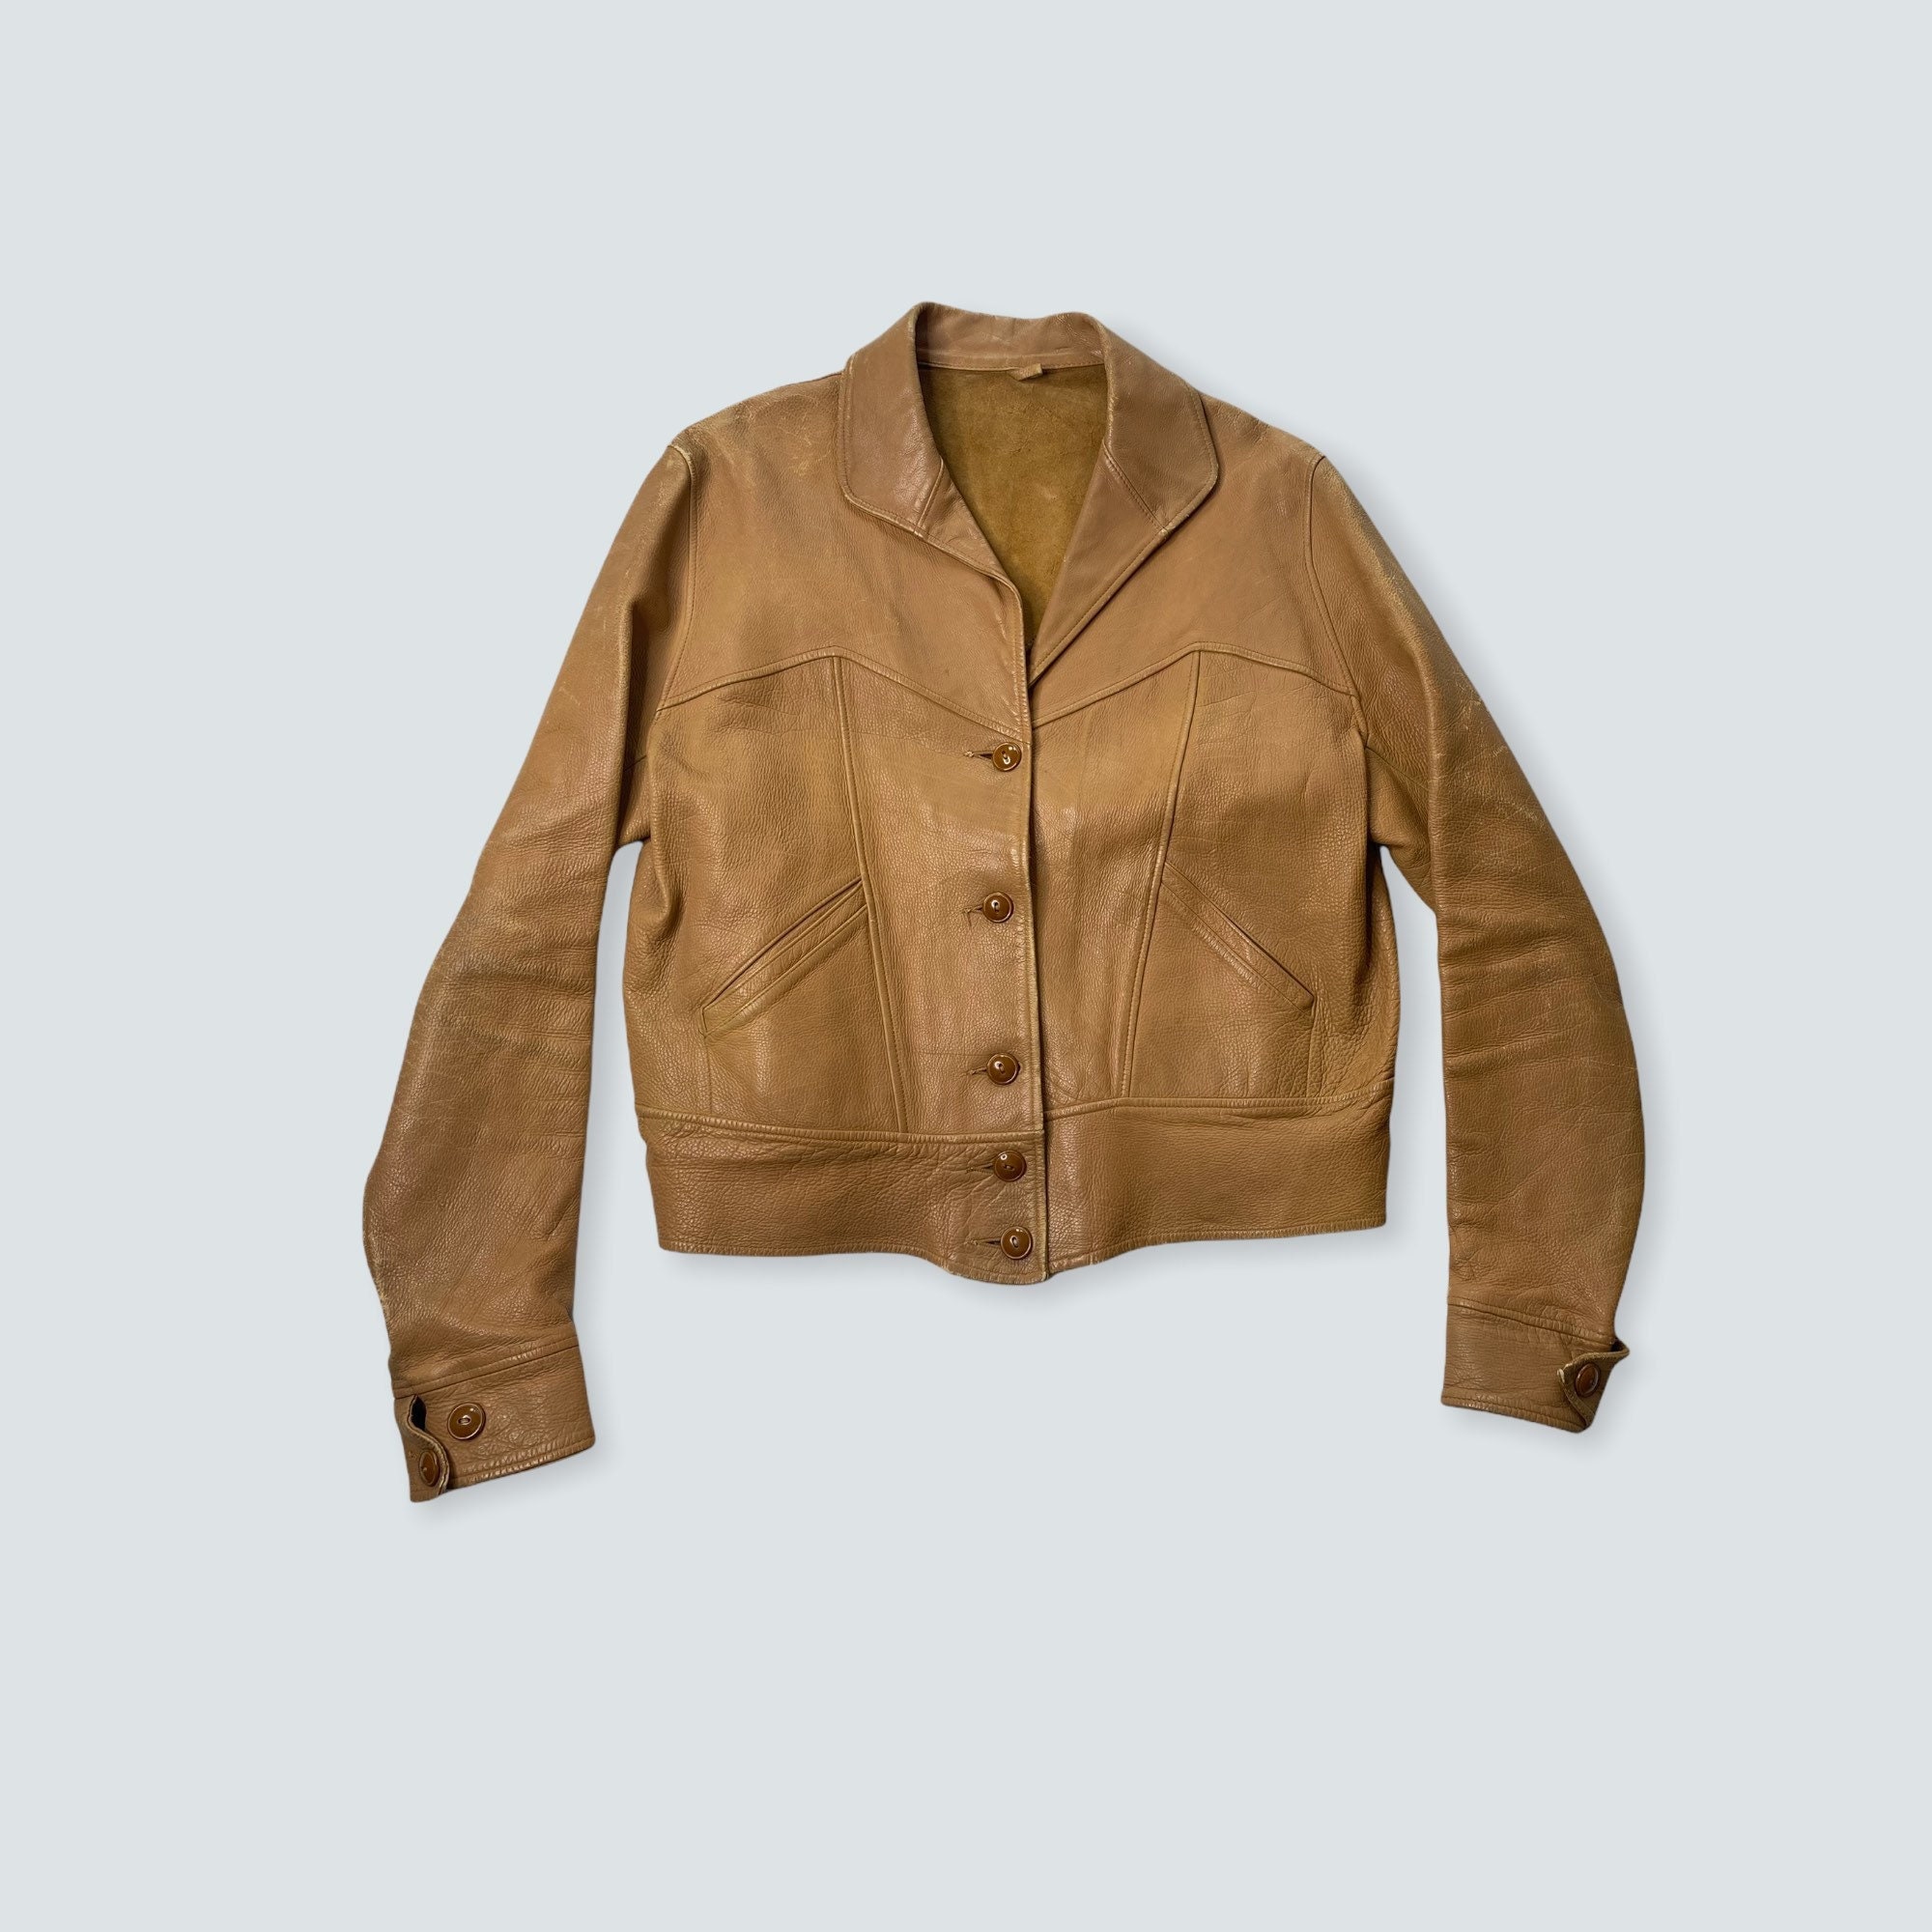 WAREHOUSE THE TOOLS / TYPE A-1 JACKET 40